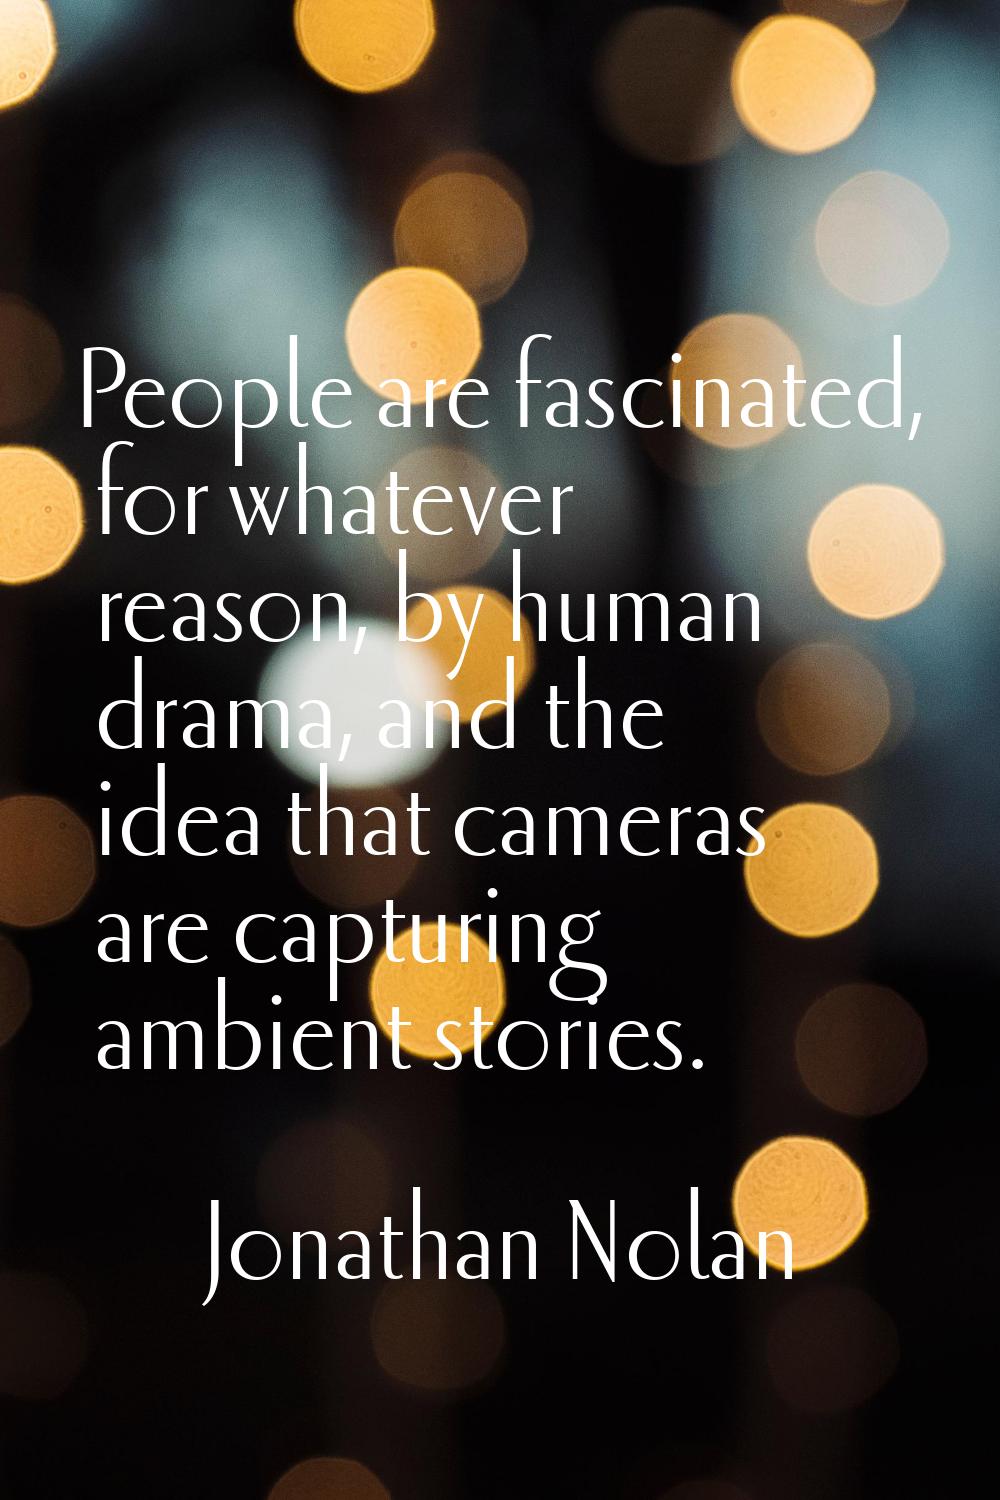 People are fascinated, for whatever reason, by human drama, and the idea that cameras are capturing